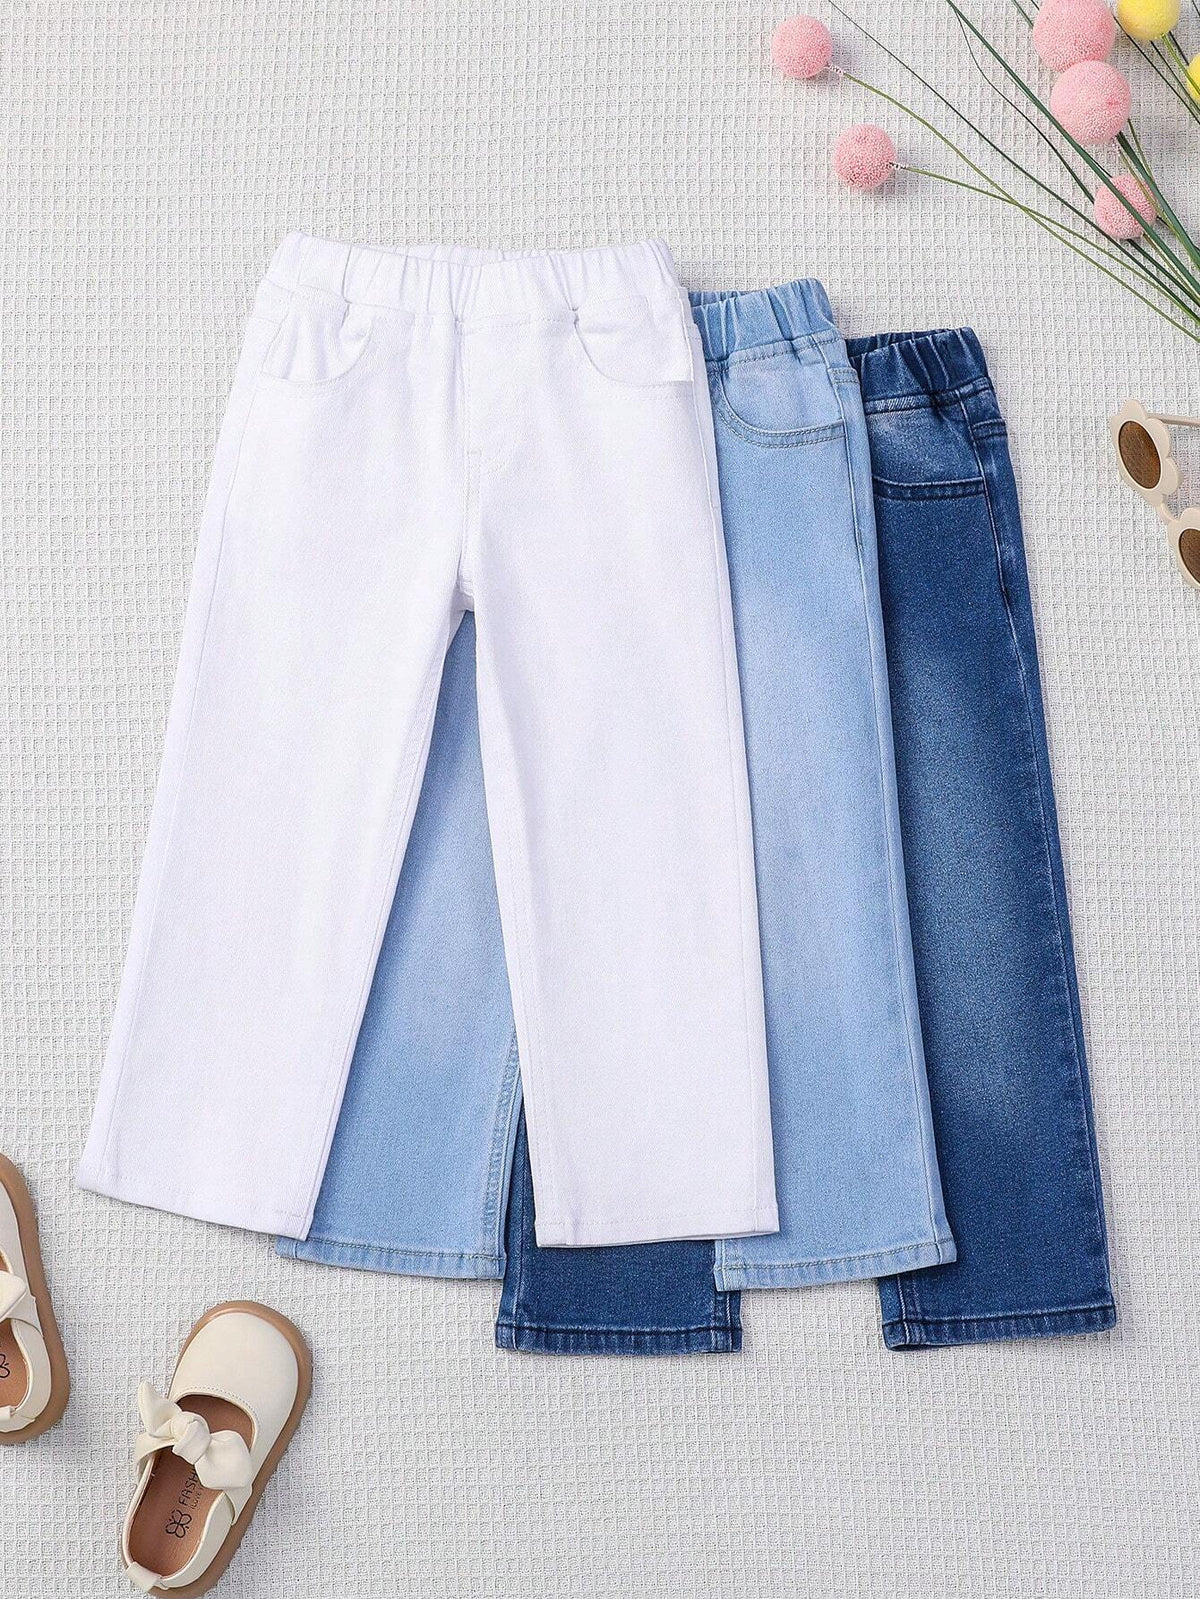 Young Girl Set Of 3 Elastic And Slim Fit Casual Jeans With Pockets